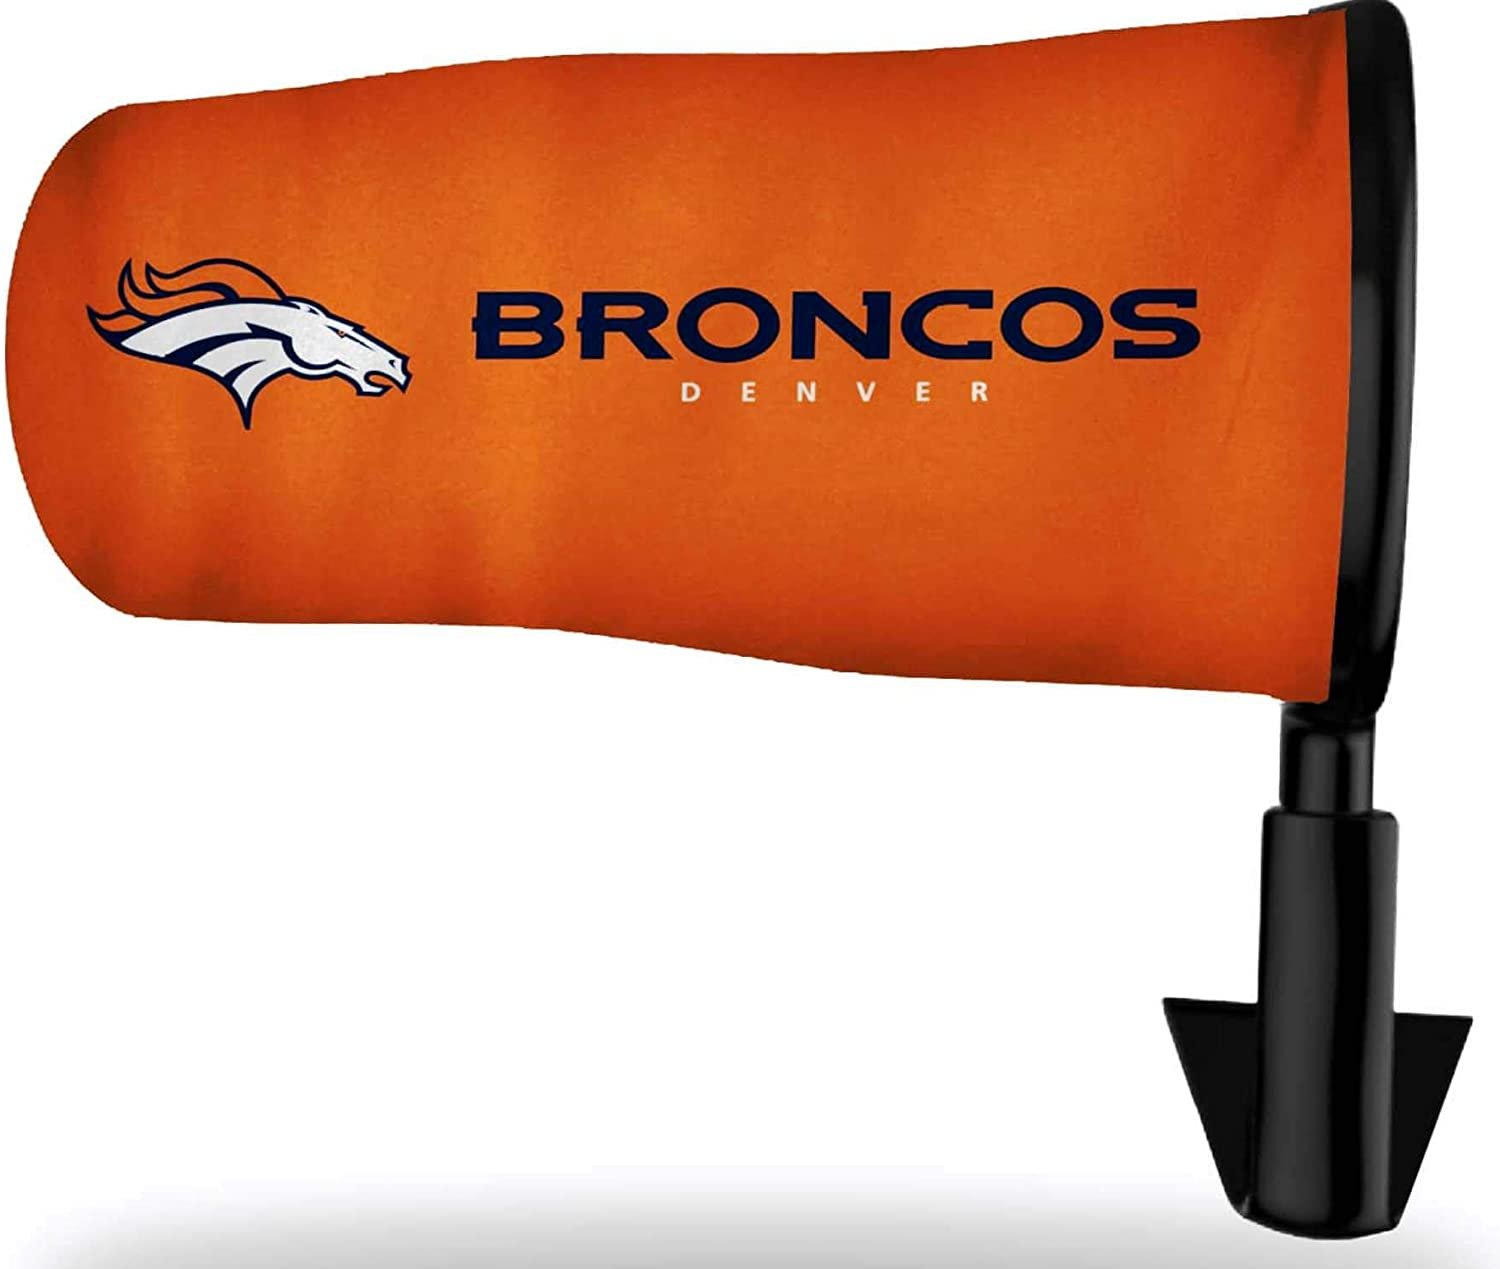 Denver Broncos Premium Auto Windsock Car Flag Banner with Pole Included, Wind Sock Football